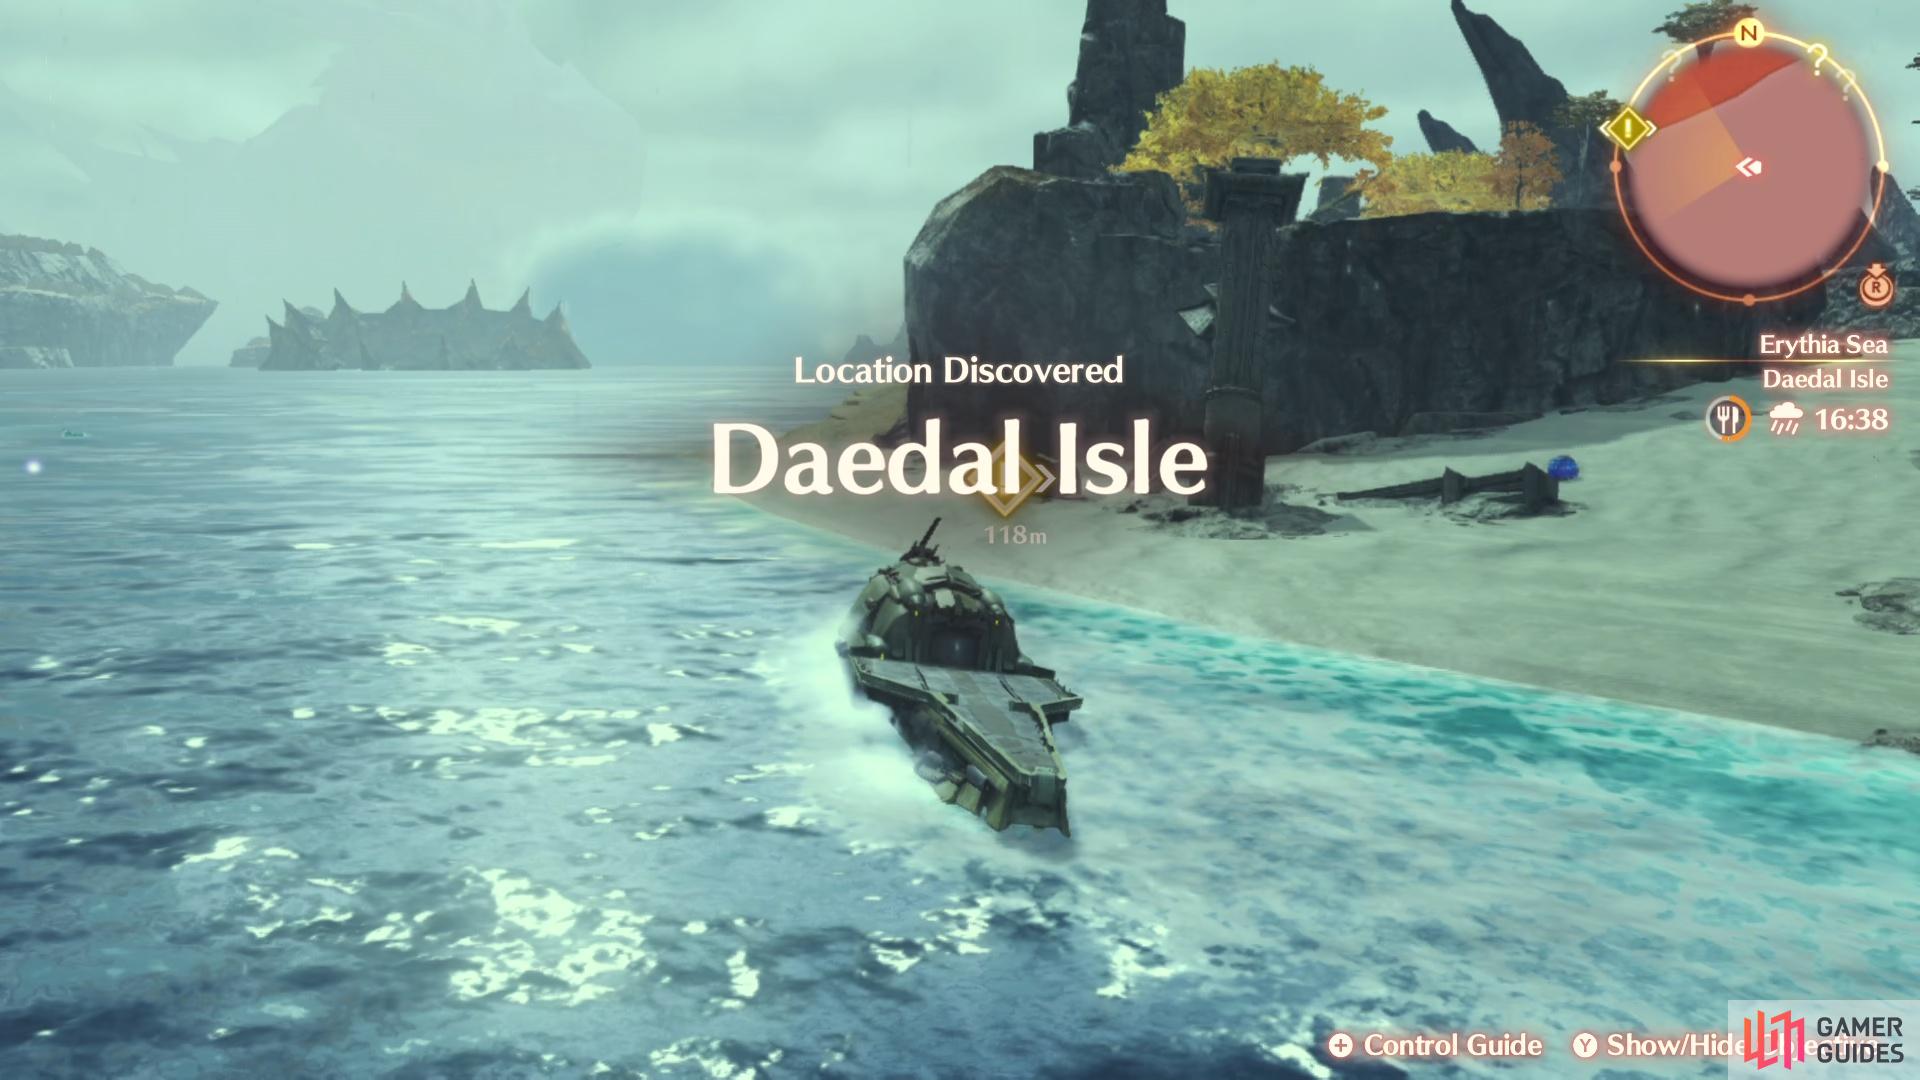 Head to Daedal Isle for challenge t wo